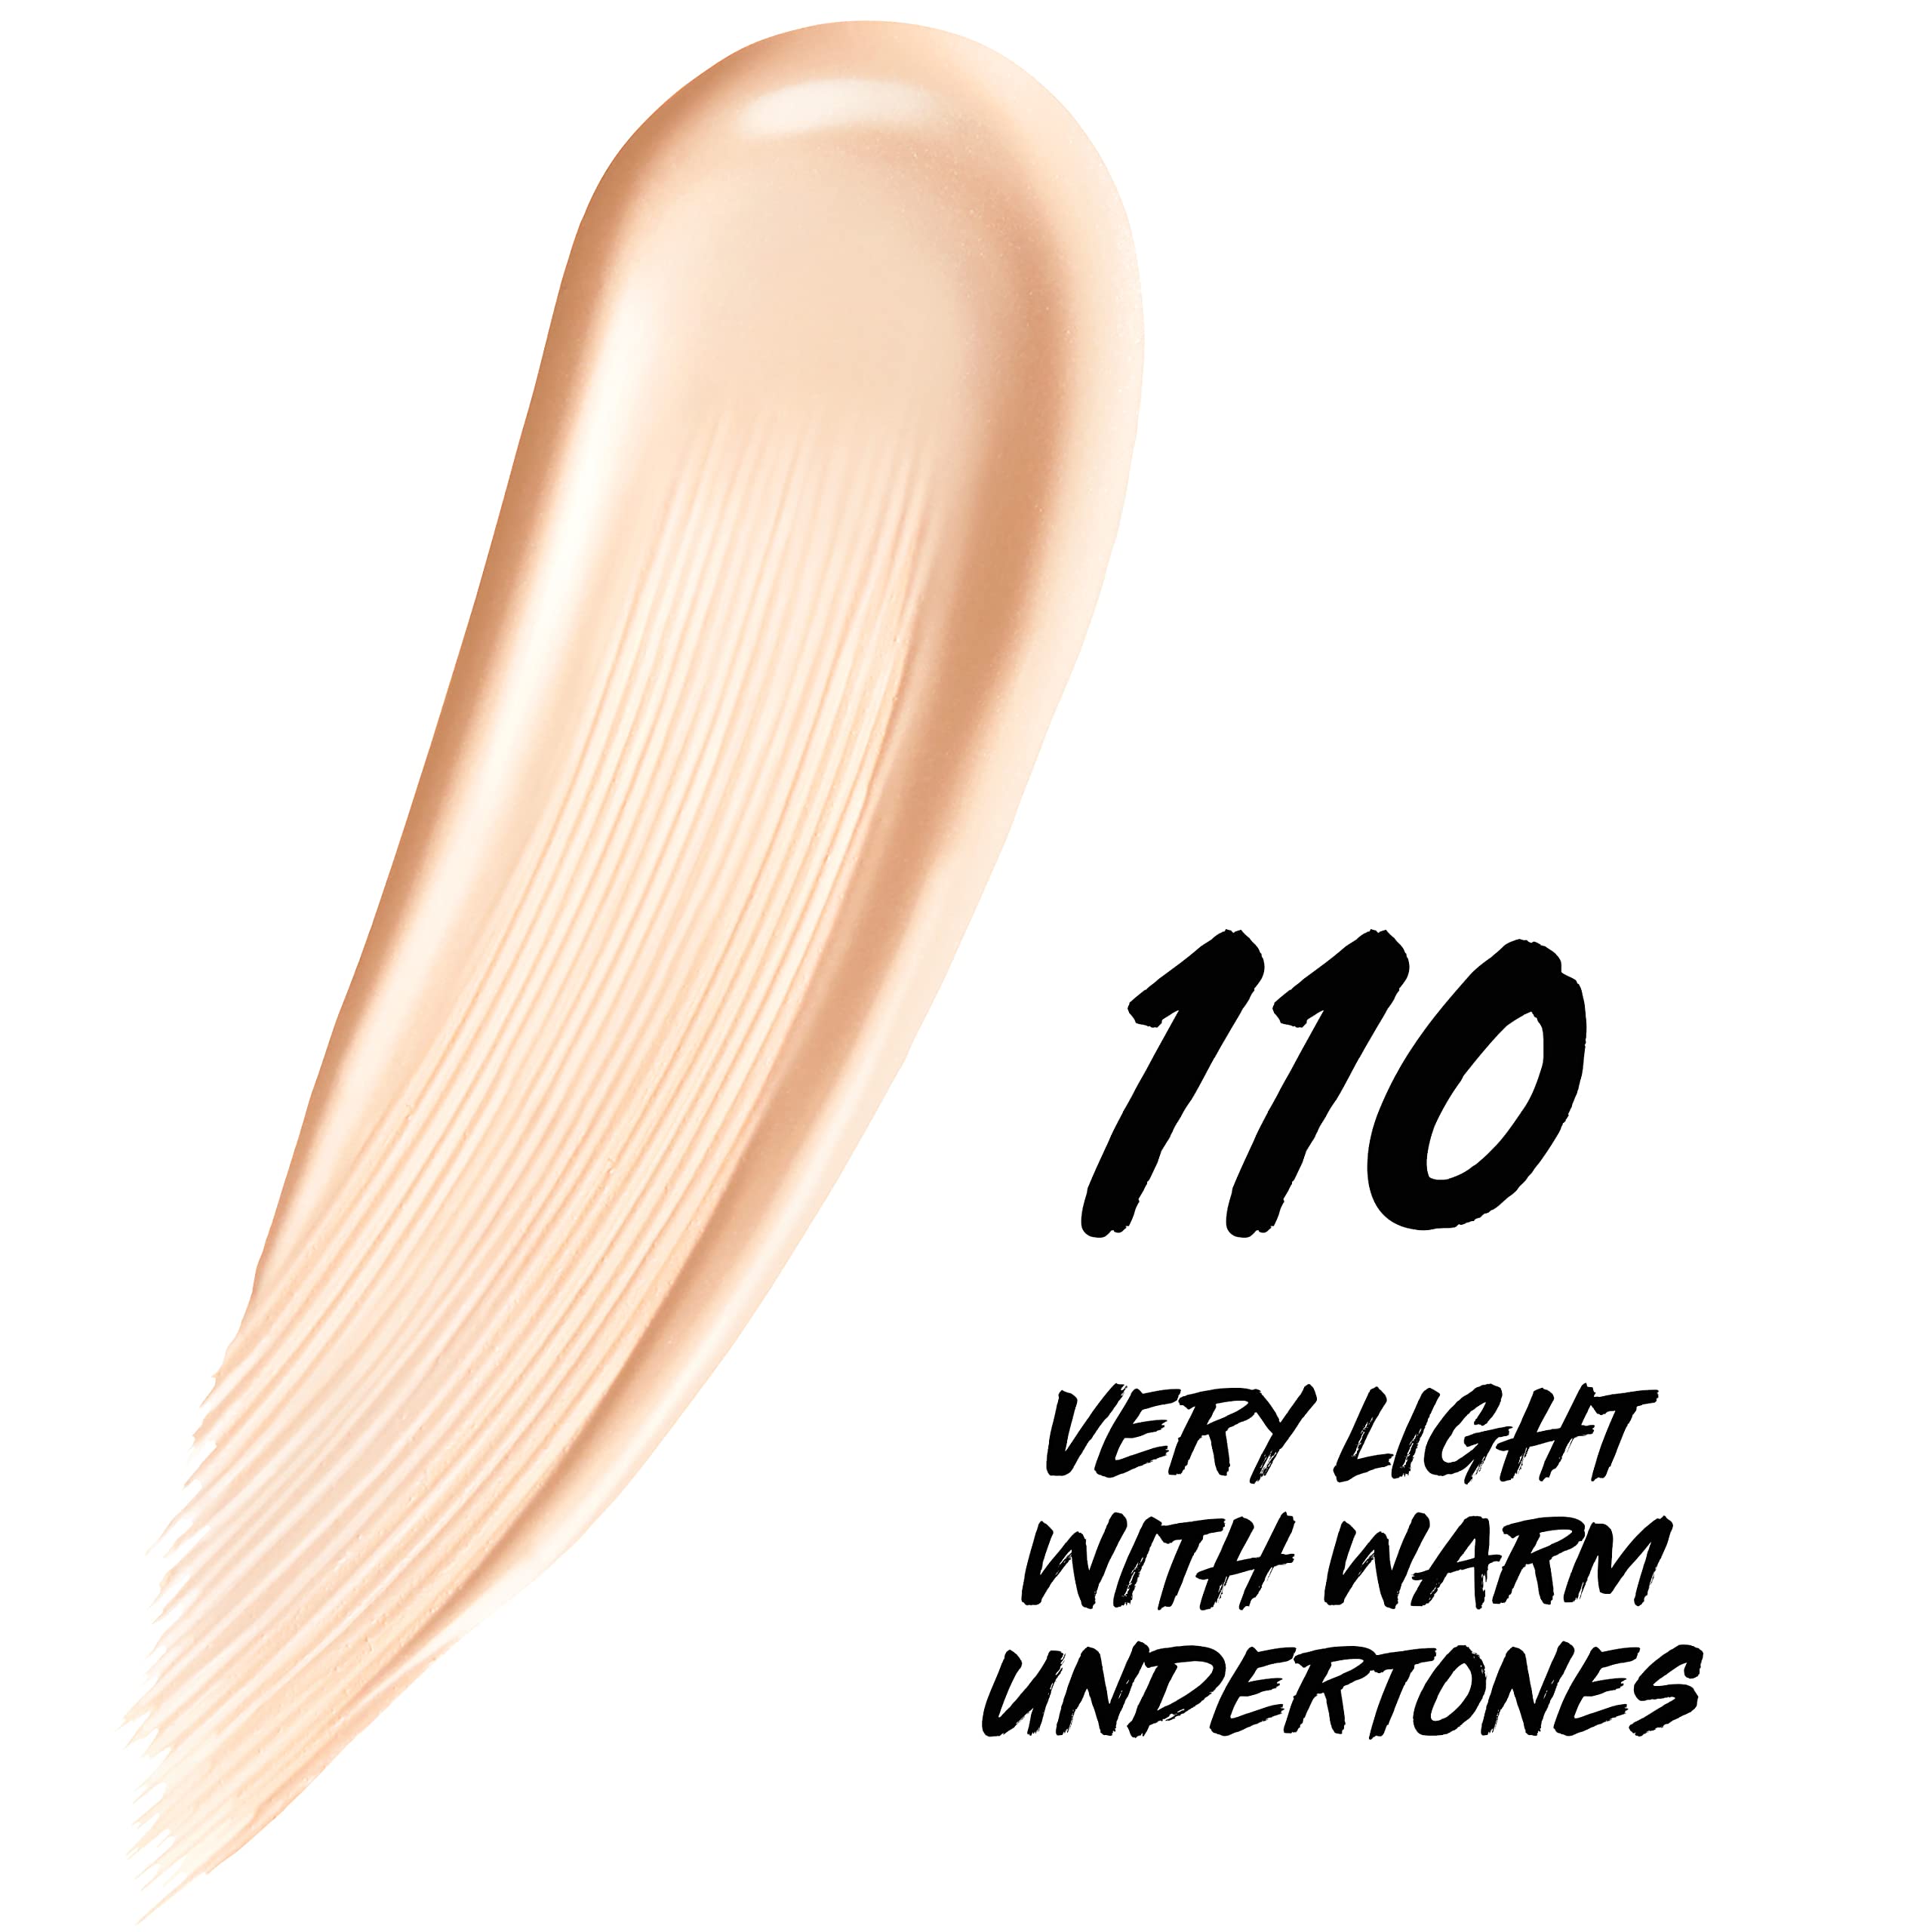 Maybelline Super Stay Up to 24HR Skin Tint, Radiant Light-to-Medium Coverage Foundation, Makeup Infused With Vitamin C, 110, 1 Count